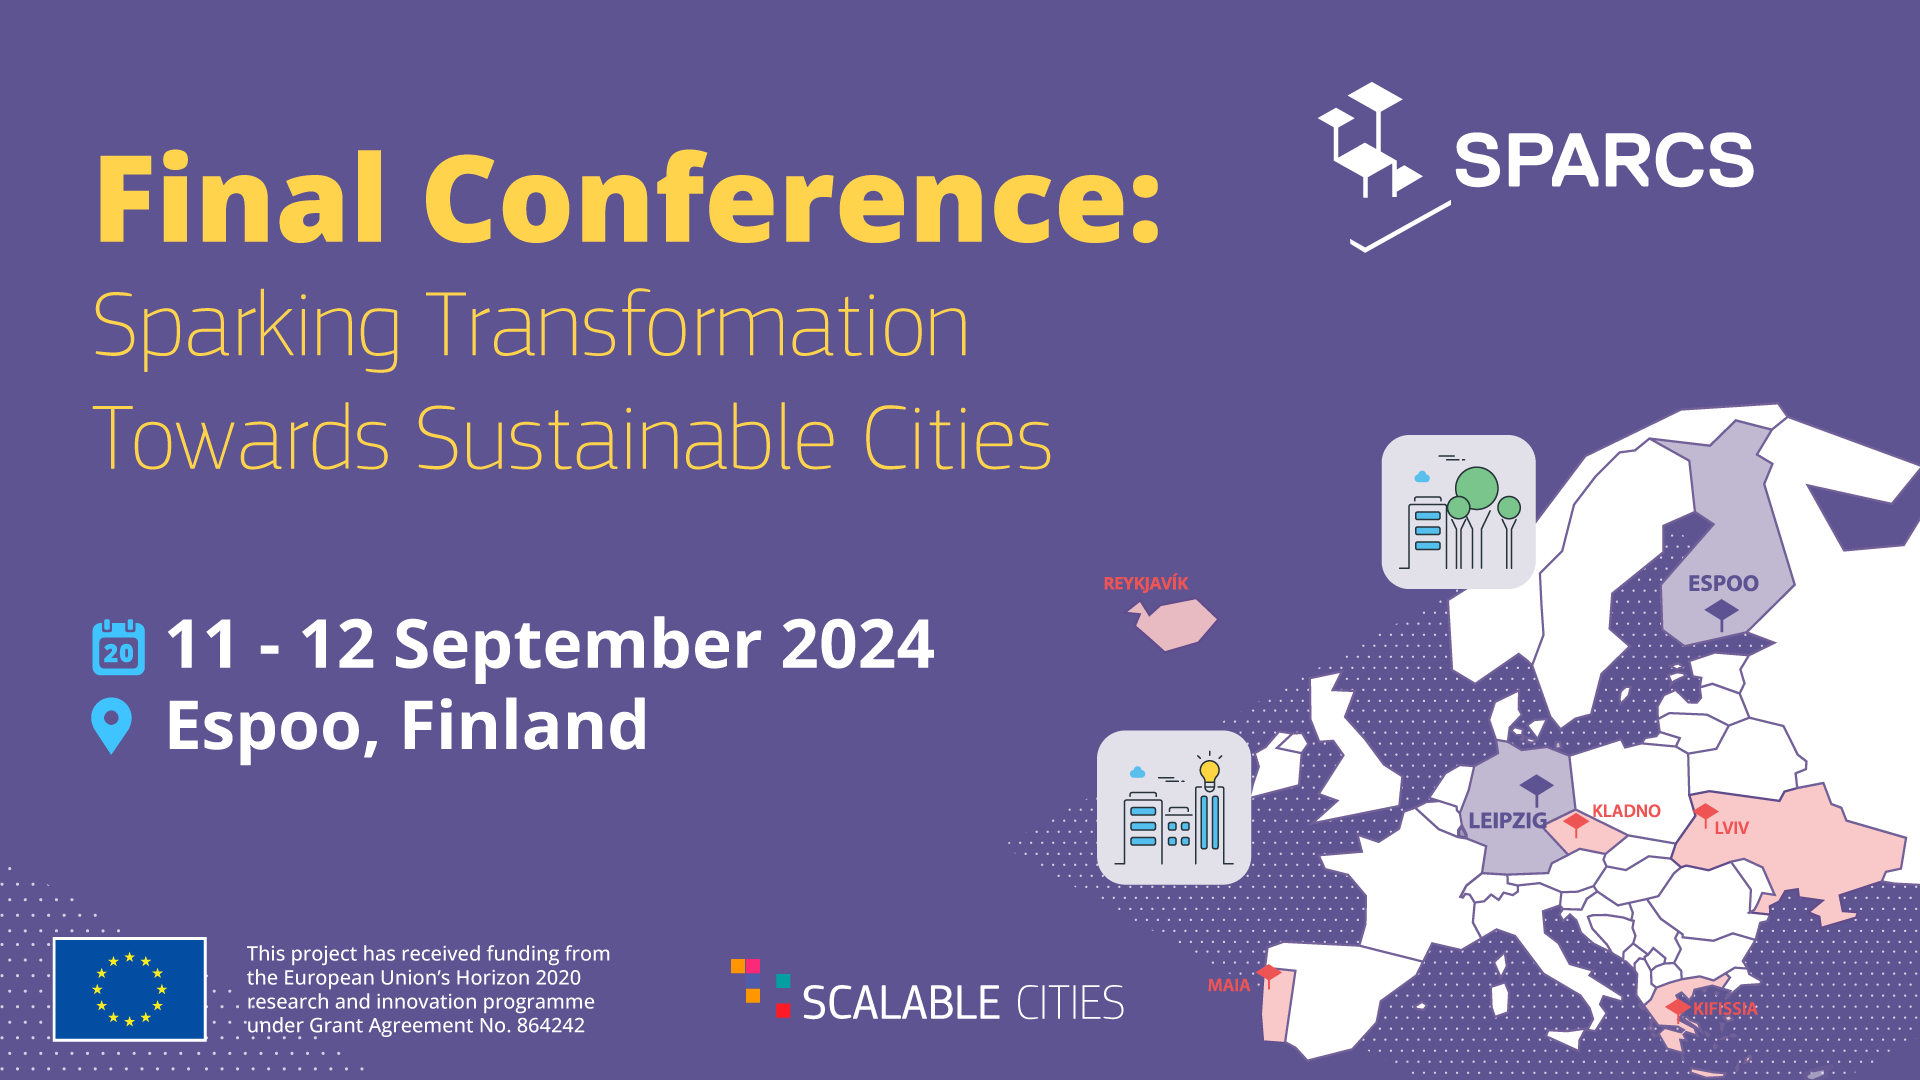 Save the date: SPARCS Announces Final Conference in September 2024